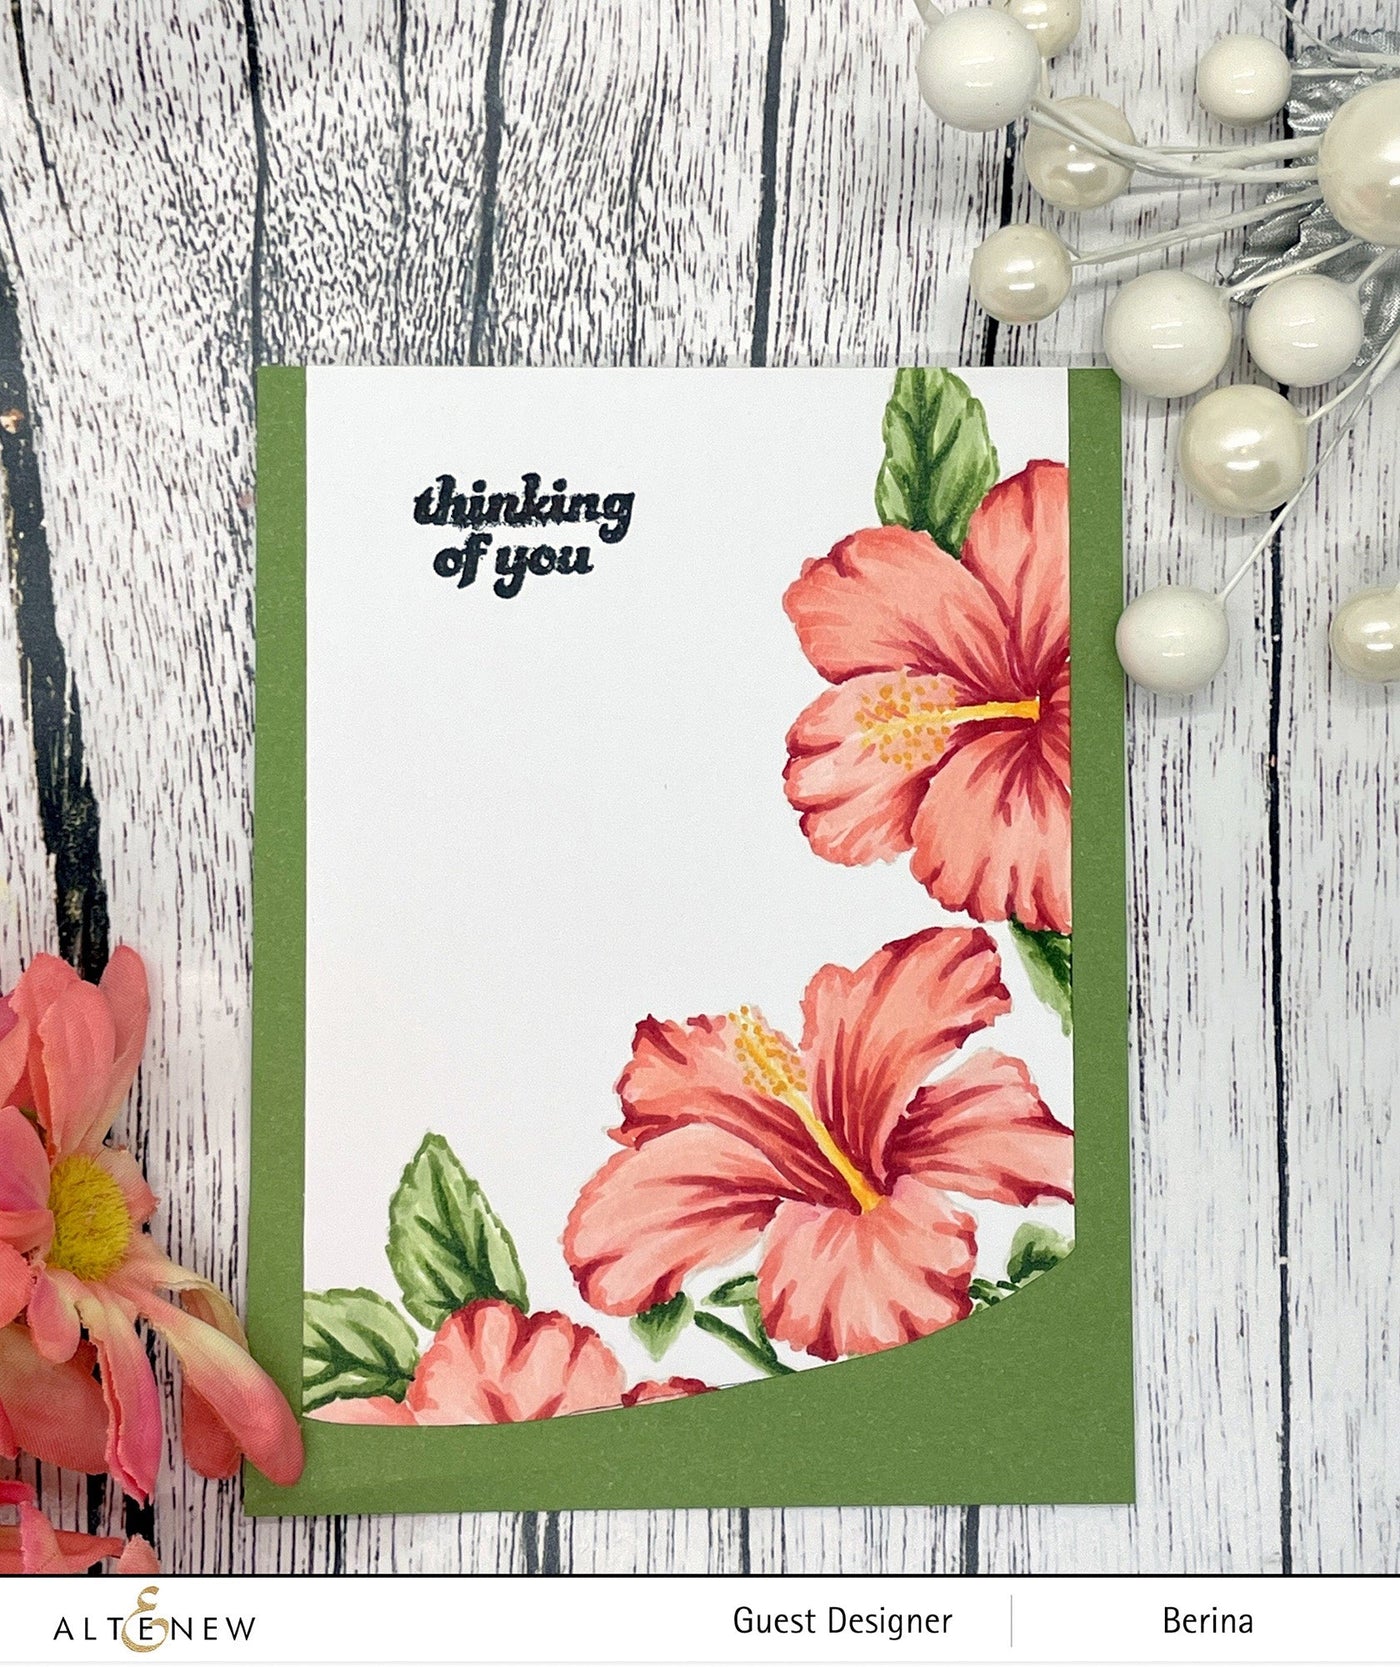 Clear Stamps Paint-A-Flower: Hibiscus Outline Stamp Set